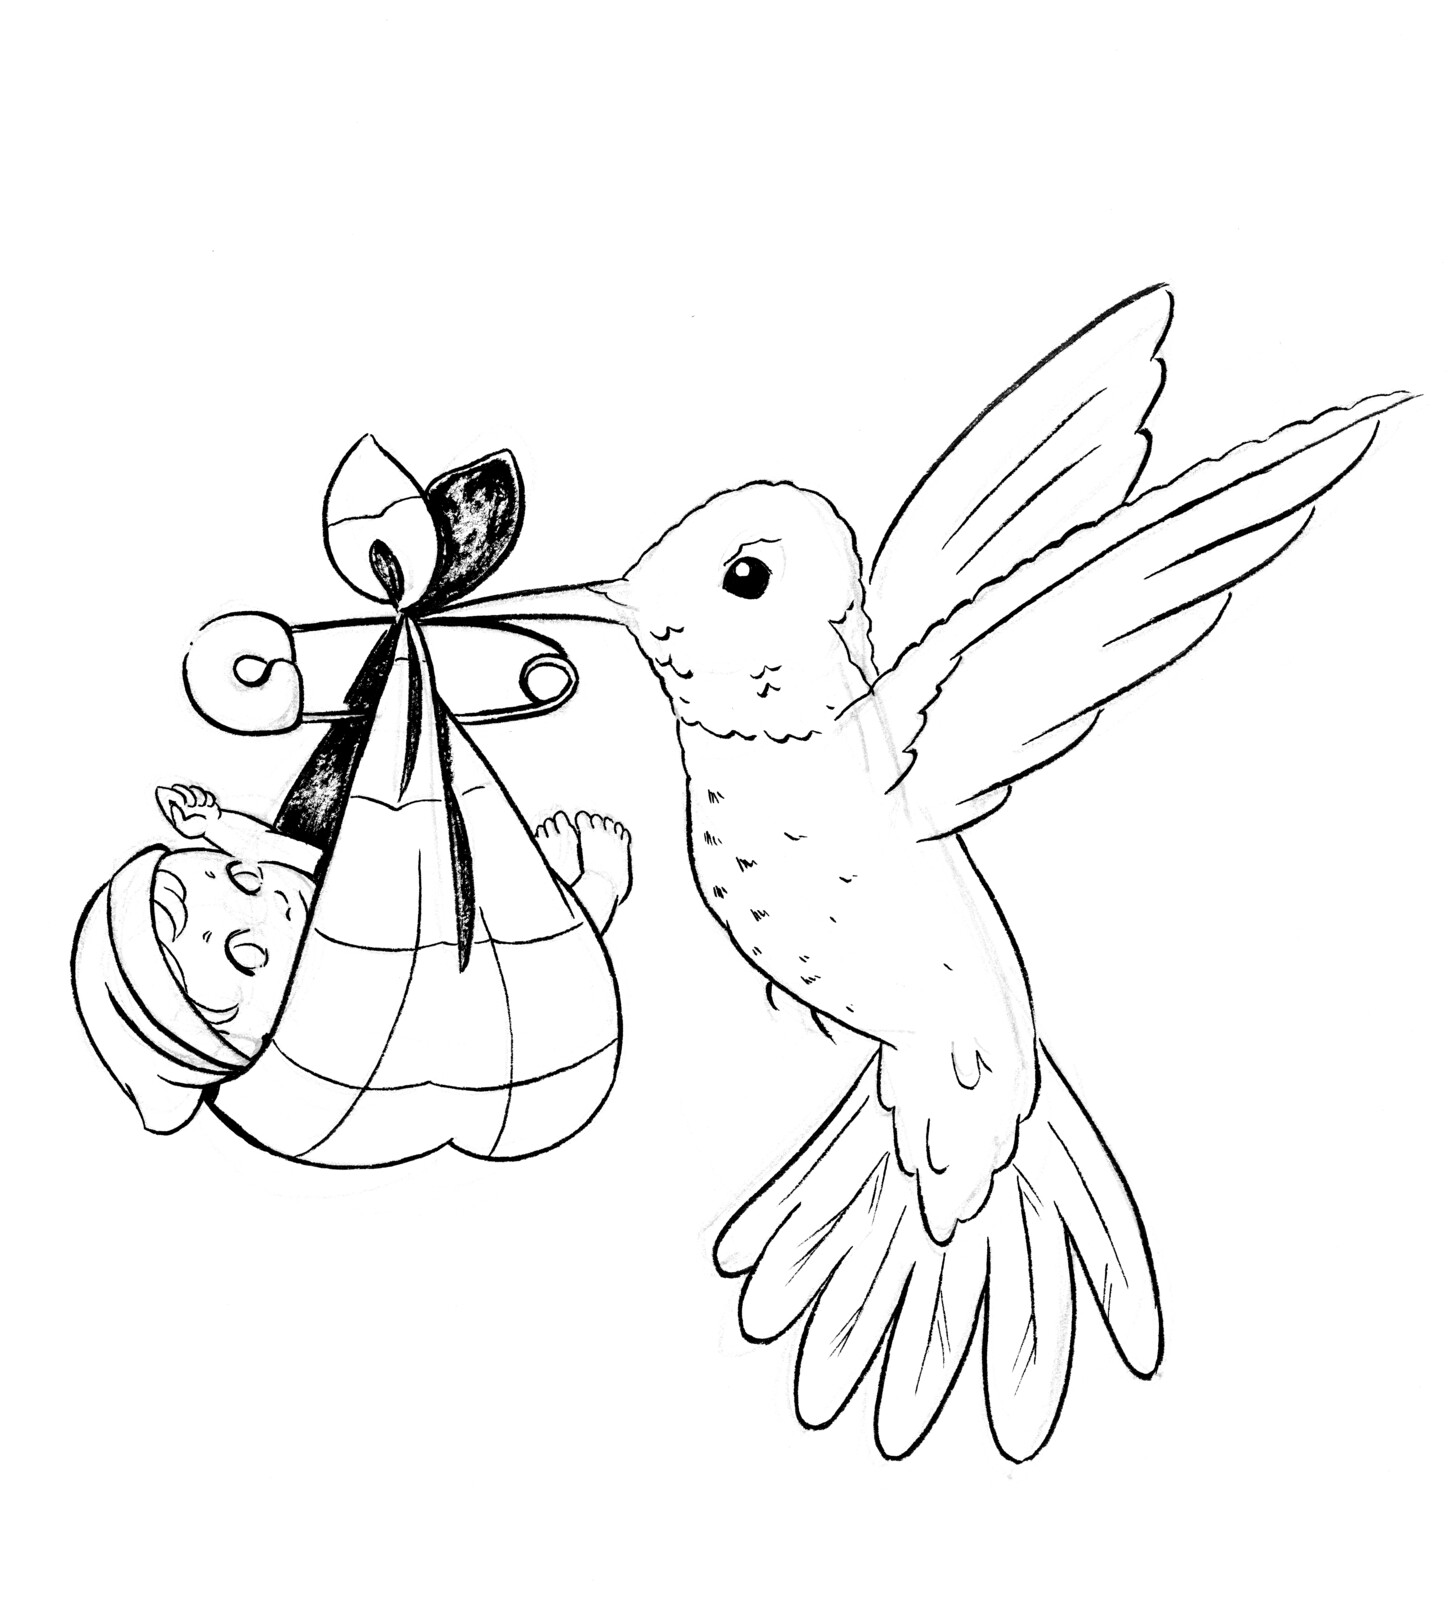 Inked illustration of a hummingbird delivering a newbory Lilliputian. 